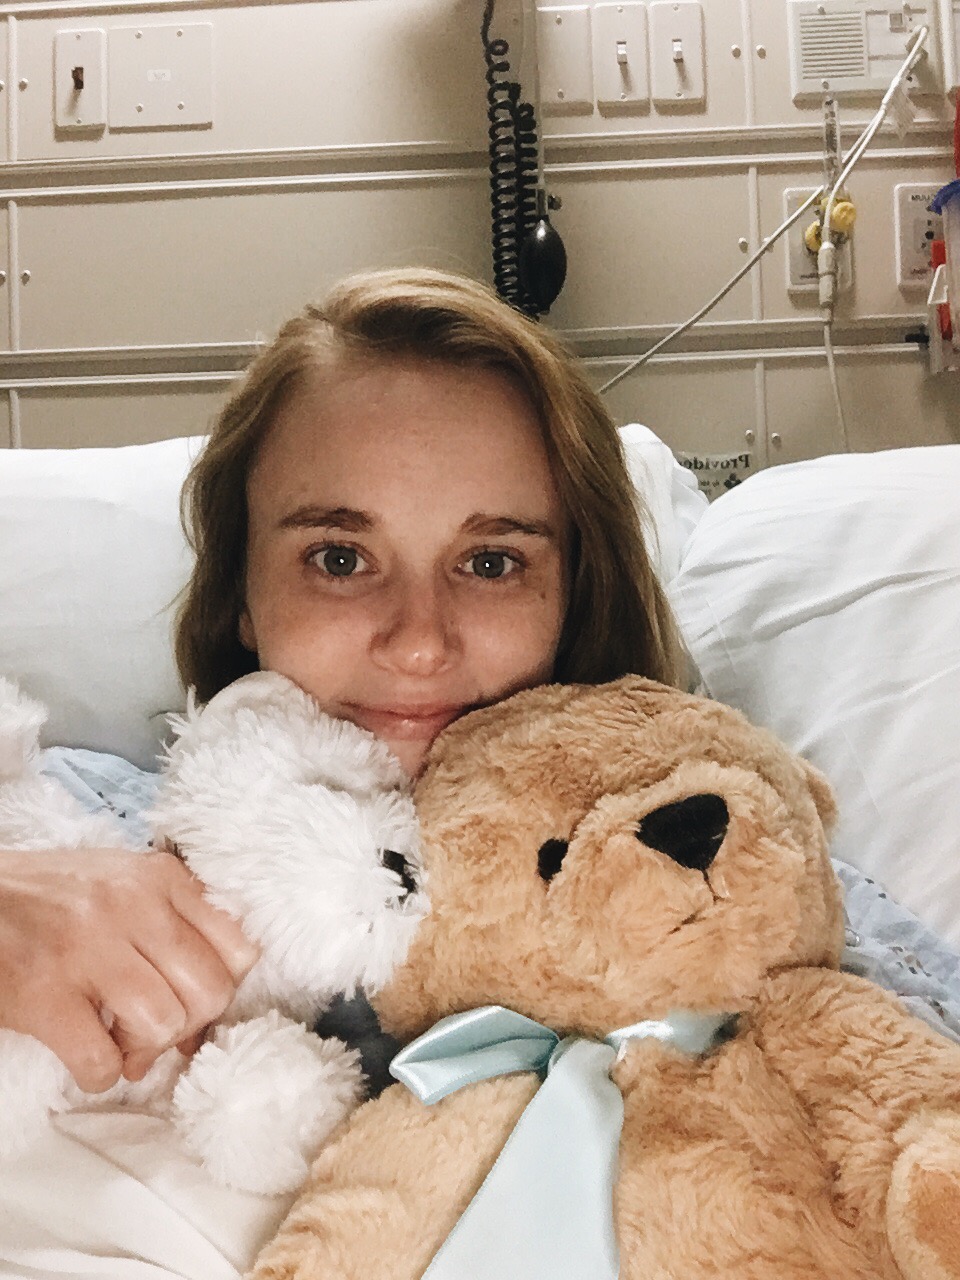 Picture of the author, Megan, in a hospital bed holding two stuffed animals.